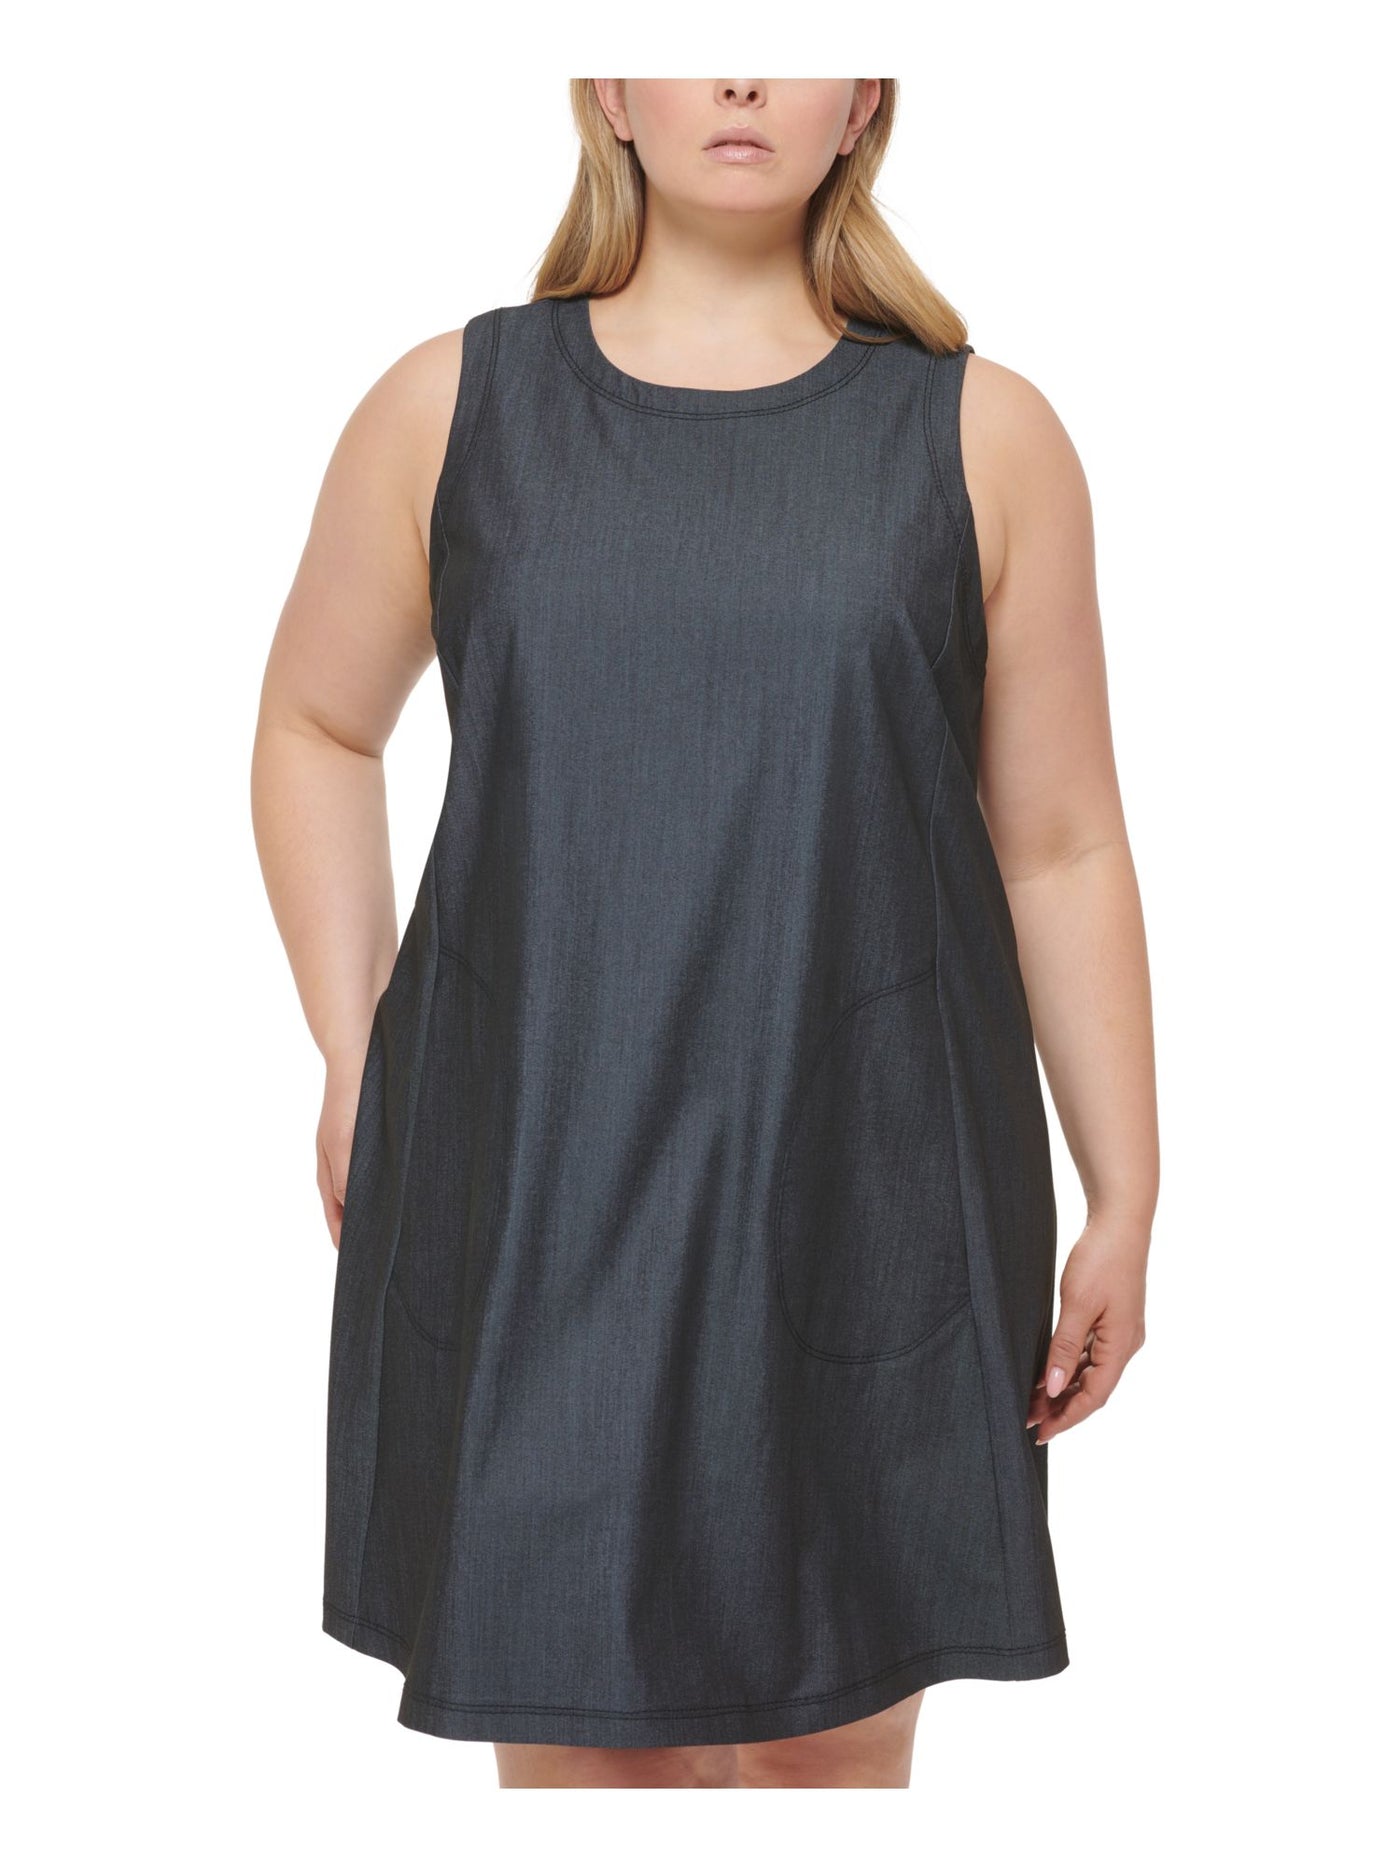 CALVIN KLEIN Womens Gray Zippered Unlined Pocketed Heather Sleeveless Round Neck Above The Knee Wear To Work Shift Dress Plus 16W